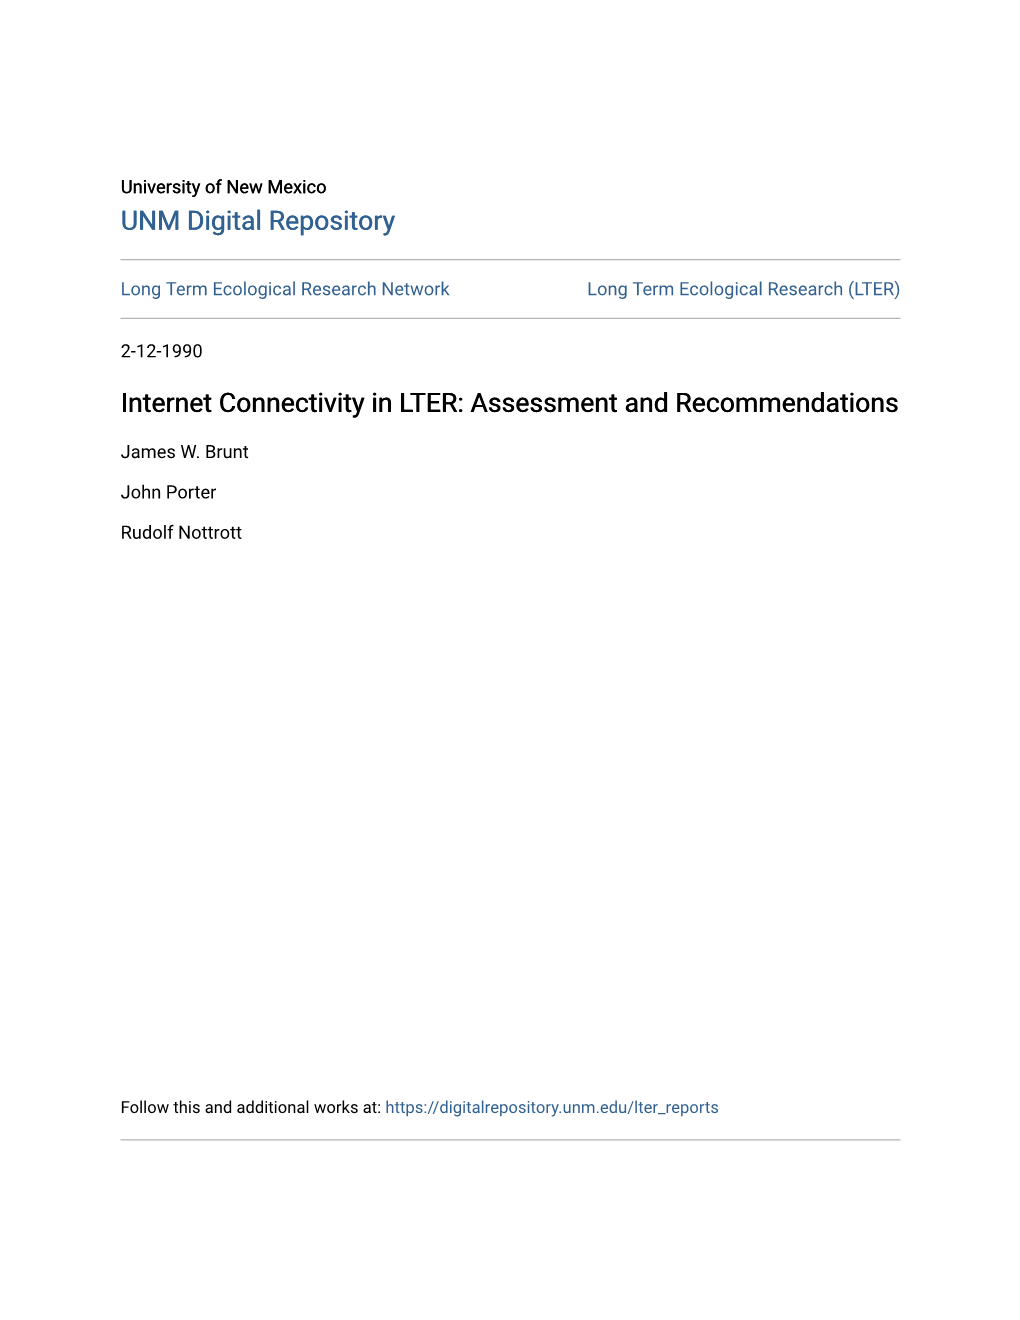 Internet Connectivity in LTER: Assessment and Recommendations